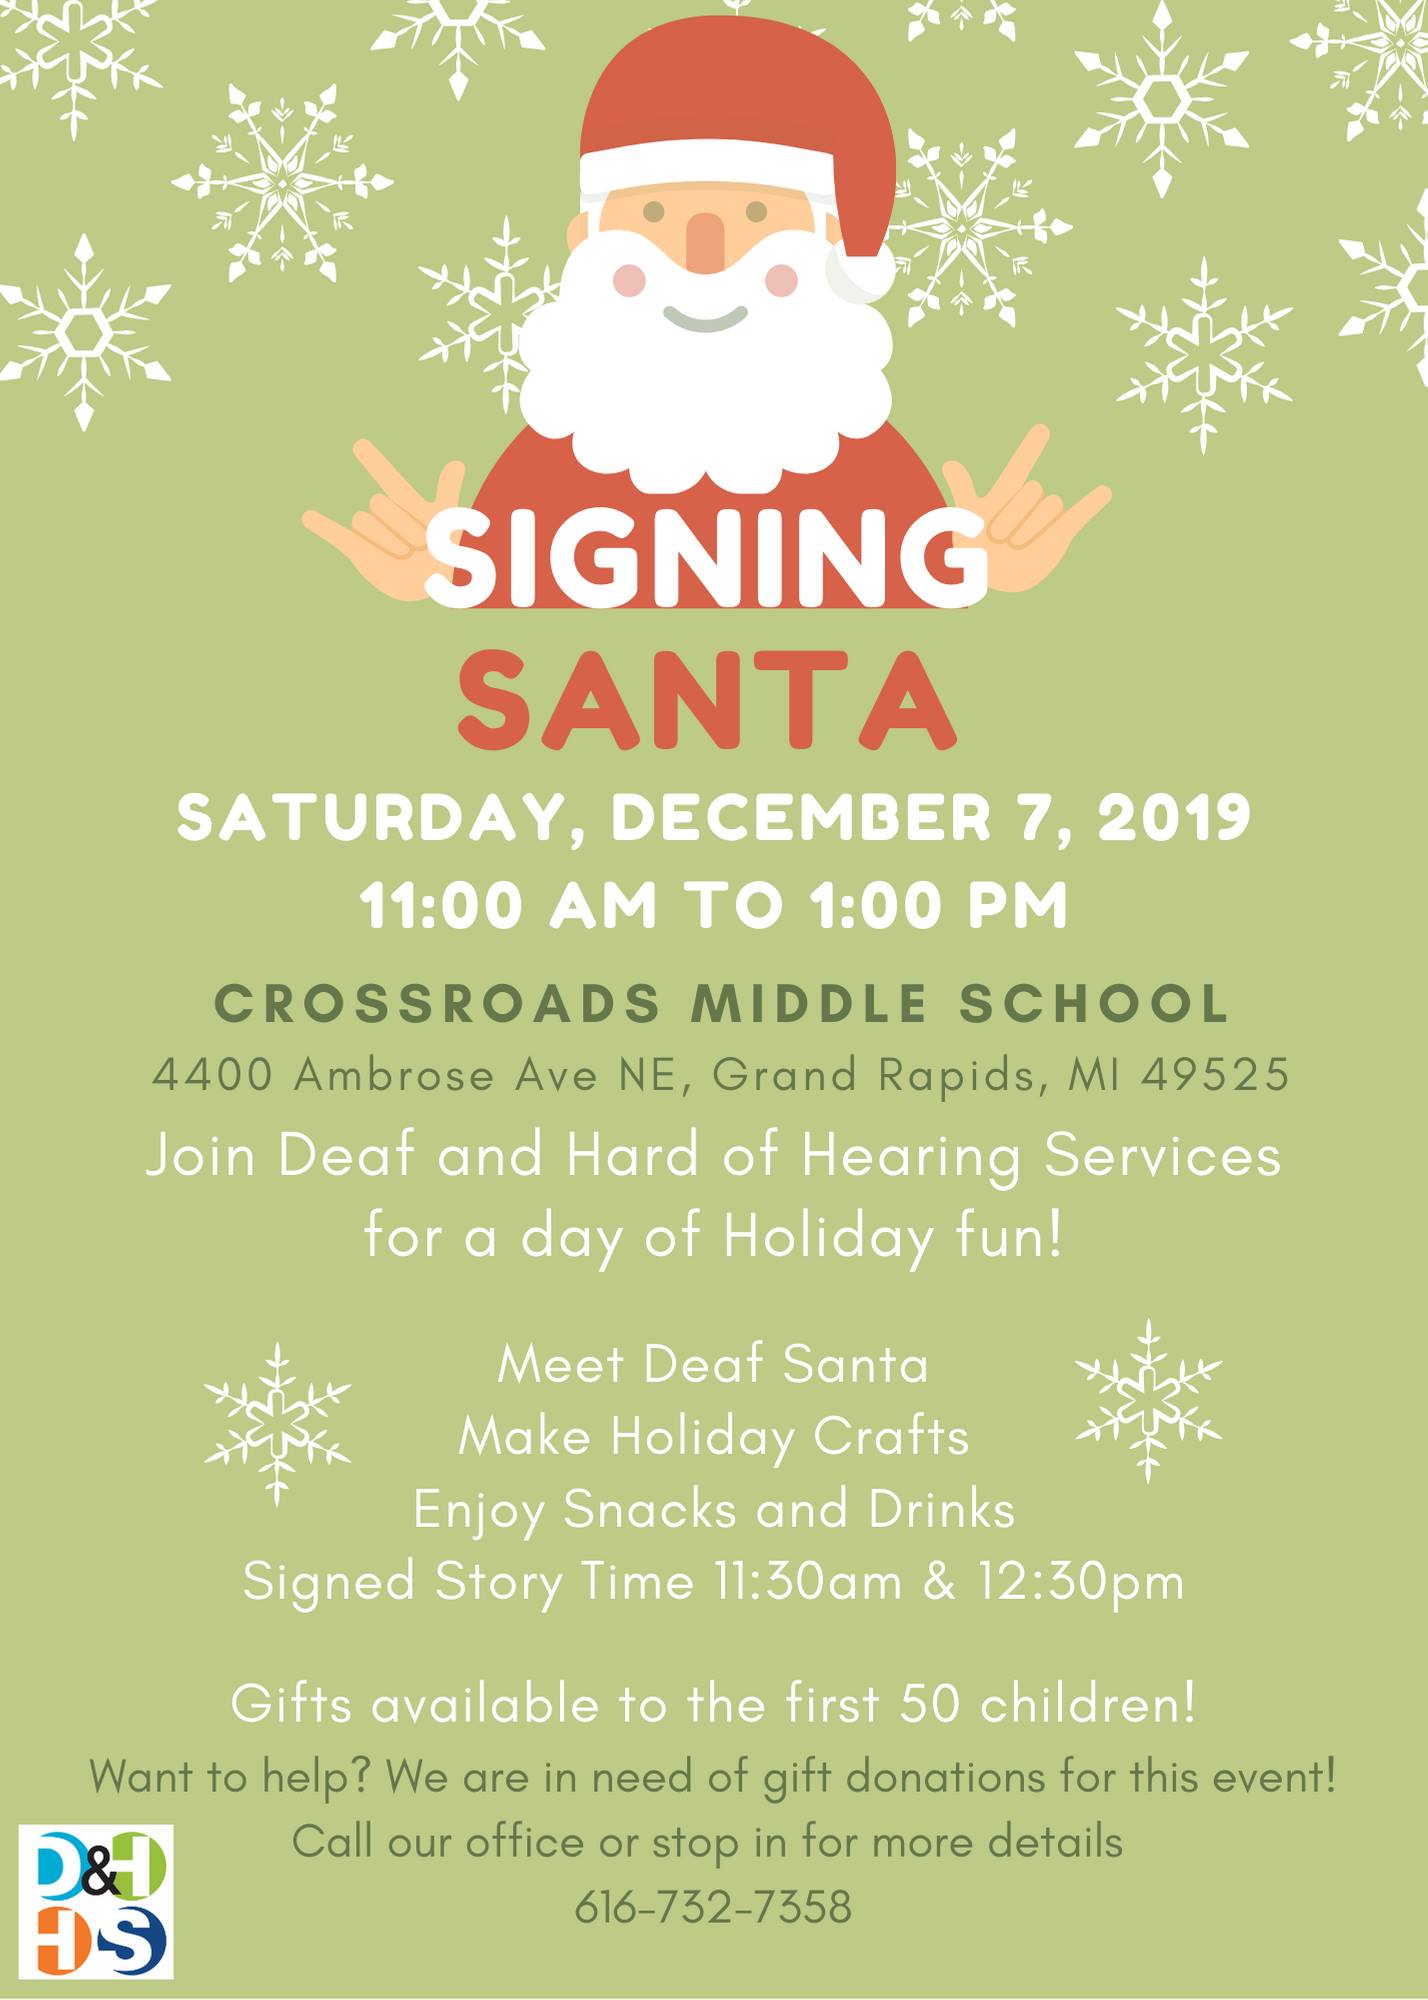 flyer containing signing santa details